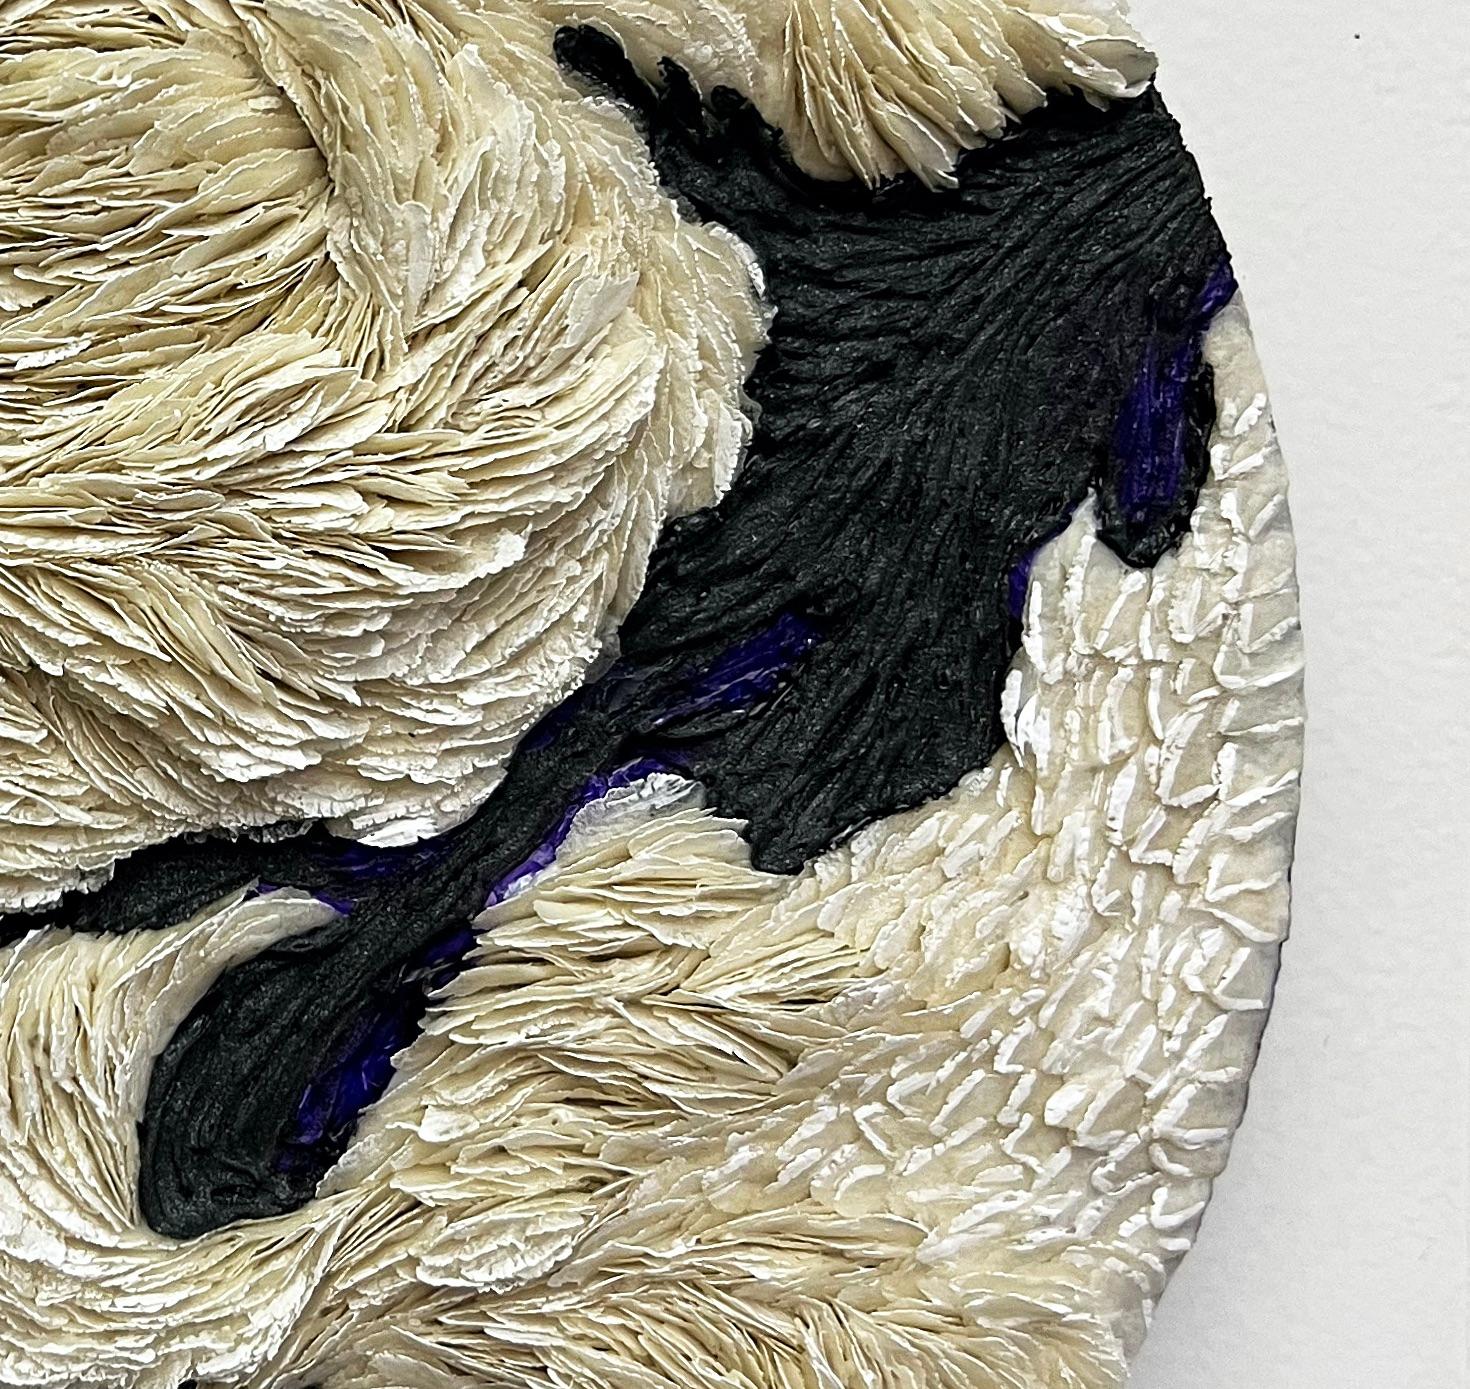 Hayoon Jay Lee is a visual artist who explores the fundamental tension between indulgence and abnegation as it exists in terms of mind and body as well as on the level of social and political dynamics. Lee makes use of rice as an object, motif,